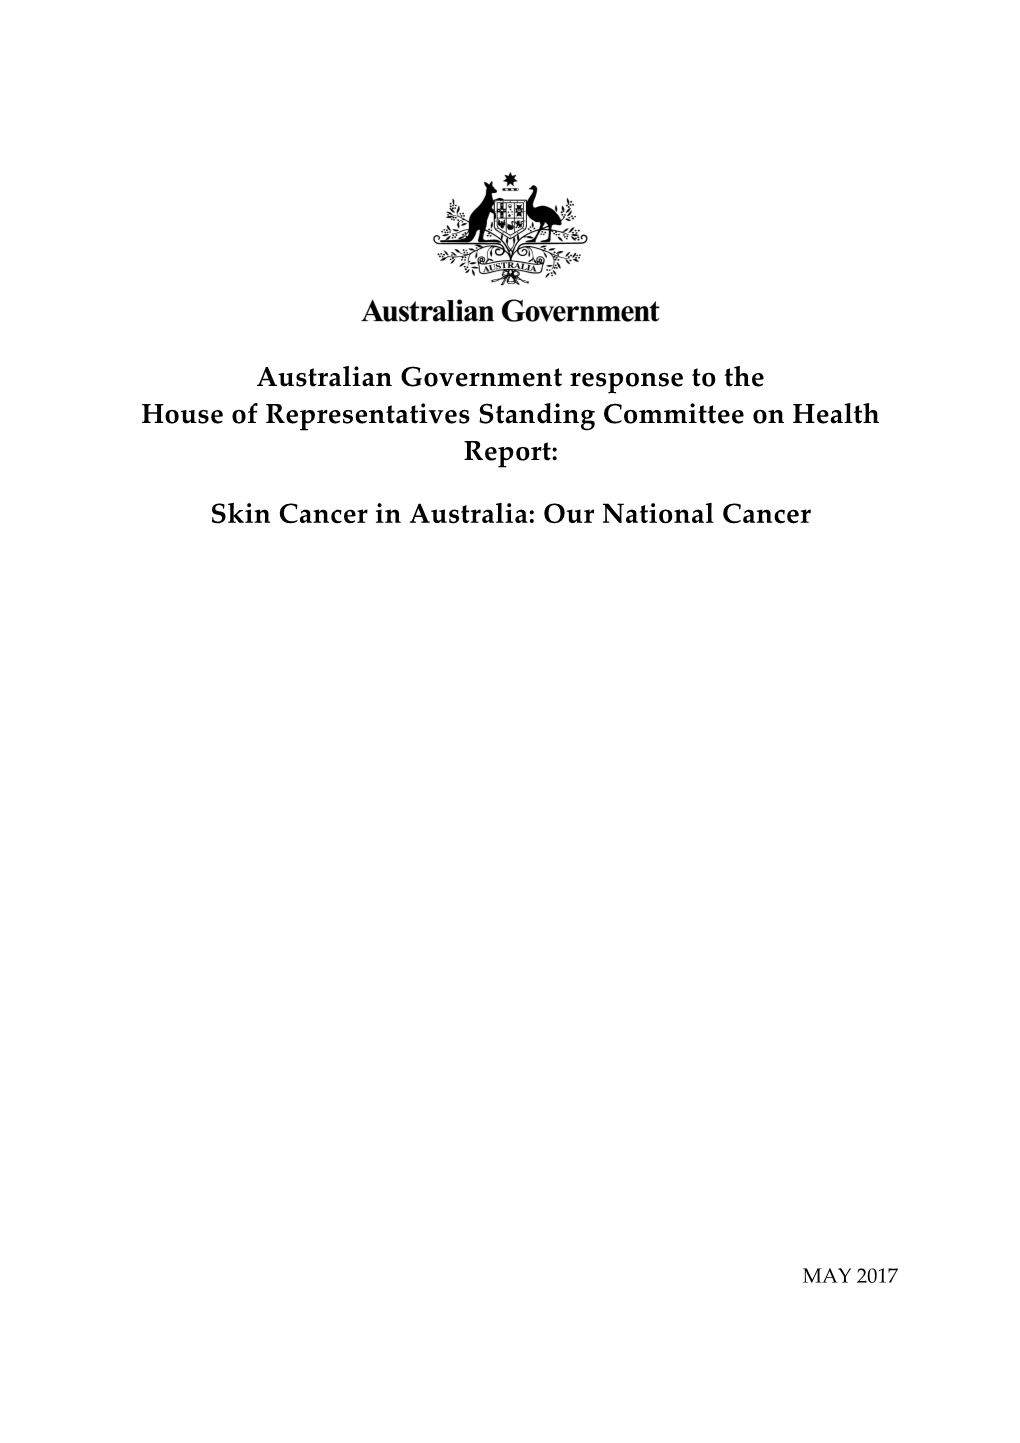 Australian Government Response to the House of Representatives Standing Committee on Health